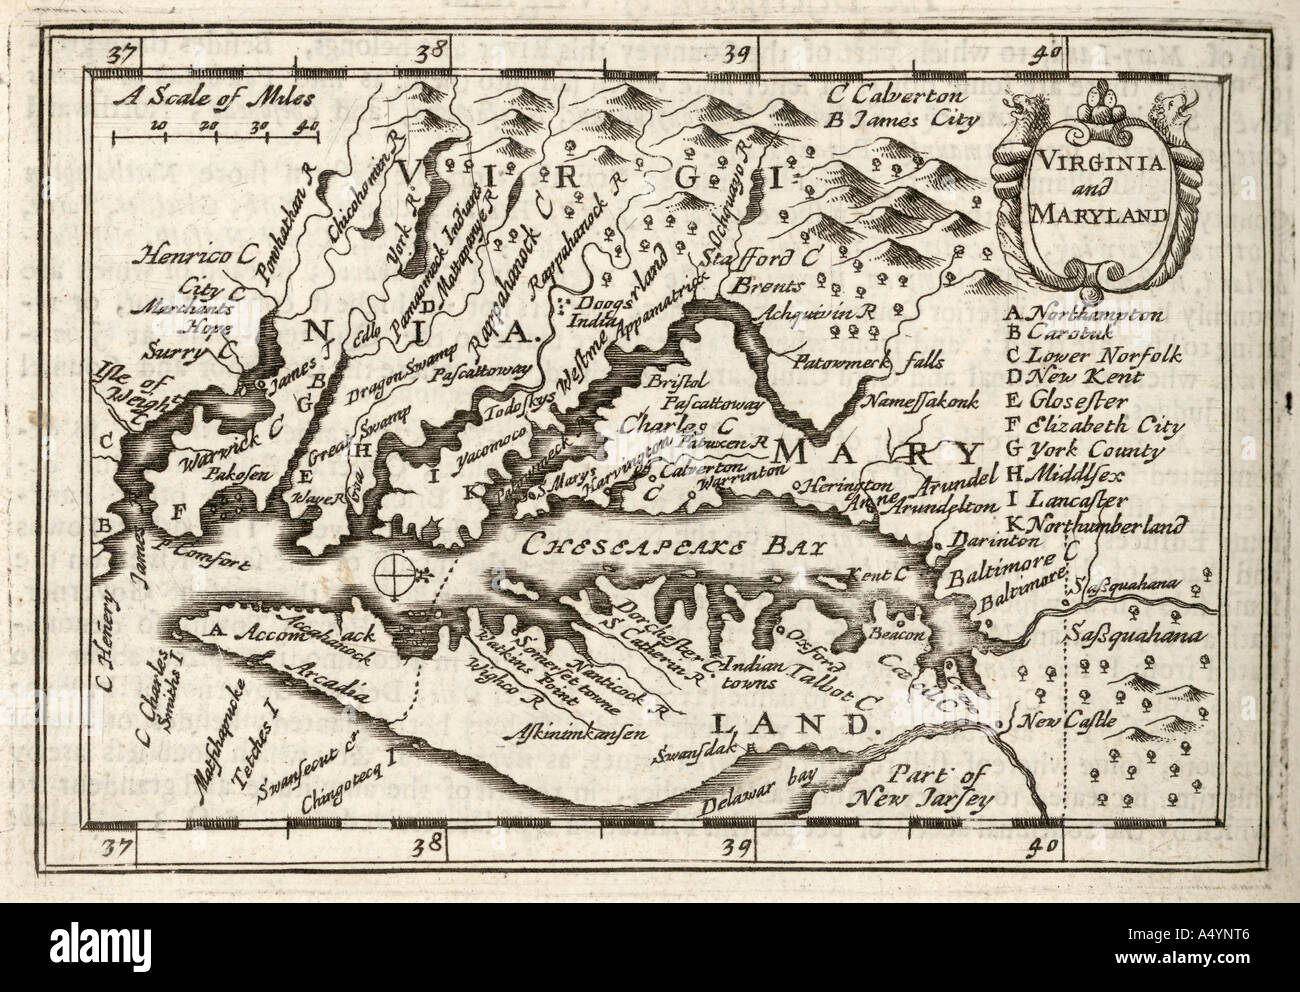 Antique map Virginia and Maryland by Petrus Kaerius 1646 from John Speed Prospect most Famous Parts of World 1675 JMH0979 Stock Photo